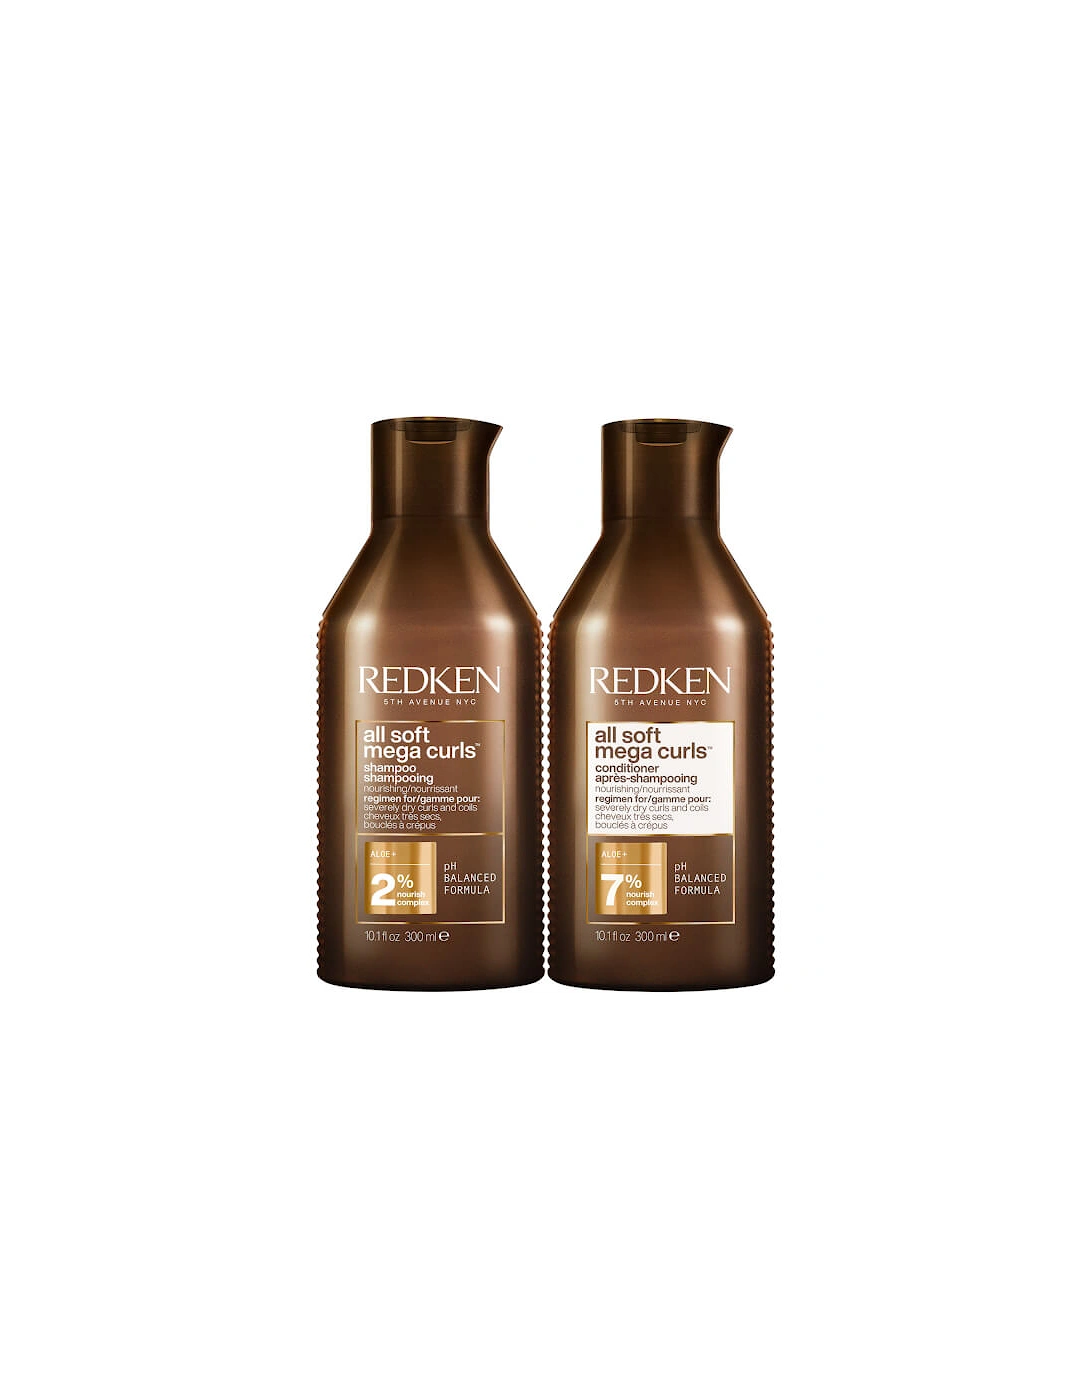 All Soft Mega Curl Hydrating and Nourishing Shampoo and Conditioner Bundle for Curly and Coily Hair, 2 of 1